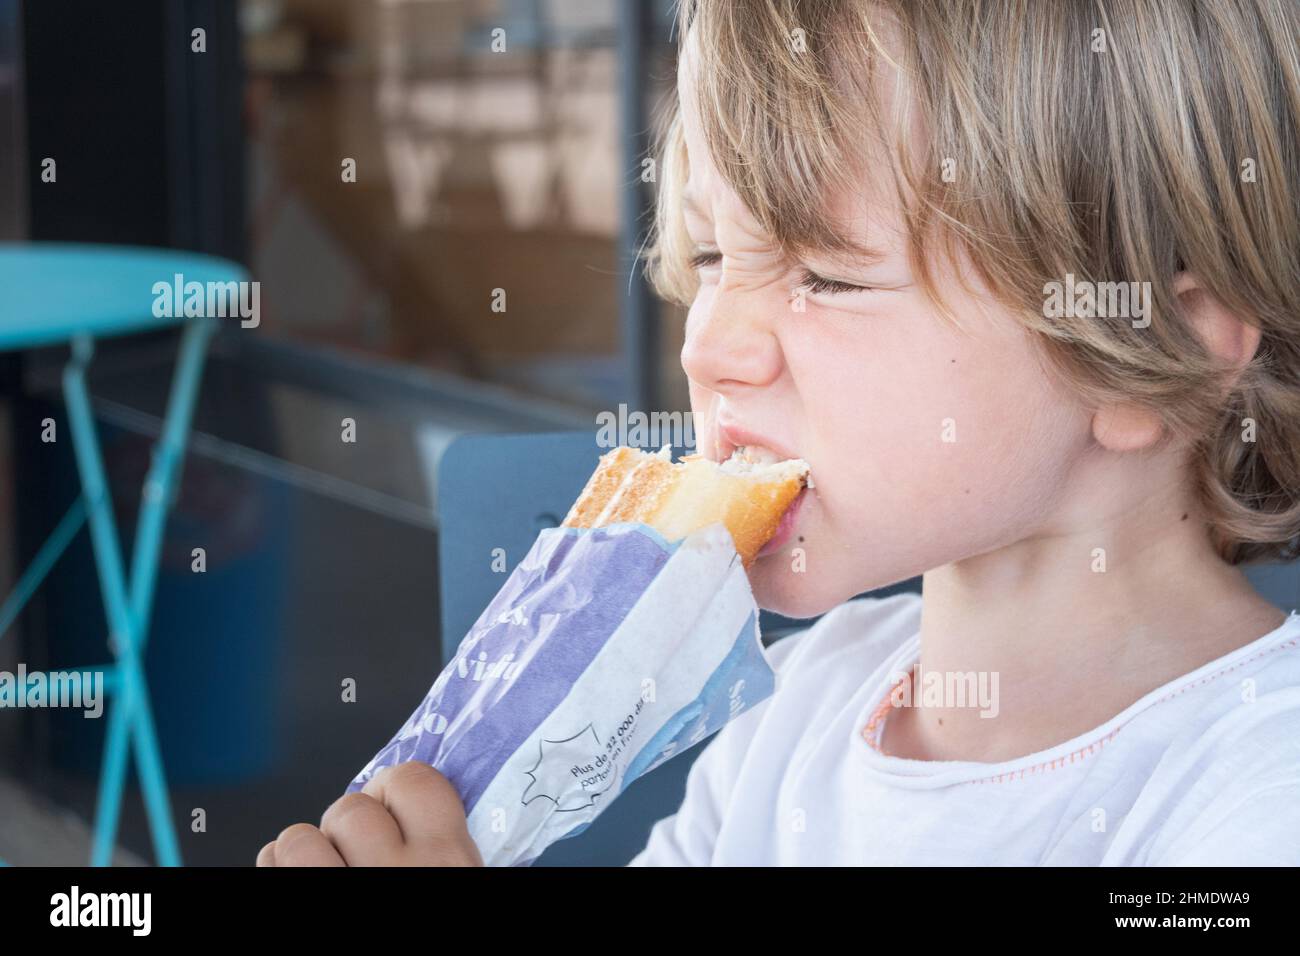 Close up of boy biting wrapped street food snack, Brittany, France Stock Photo